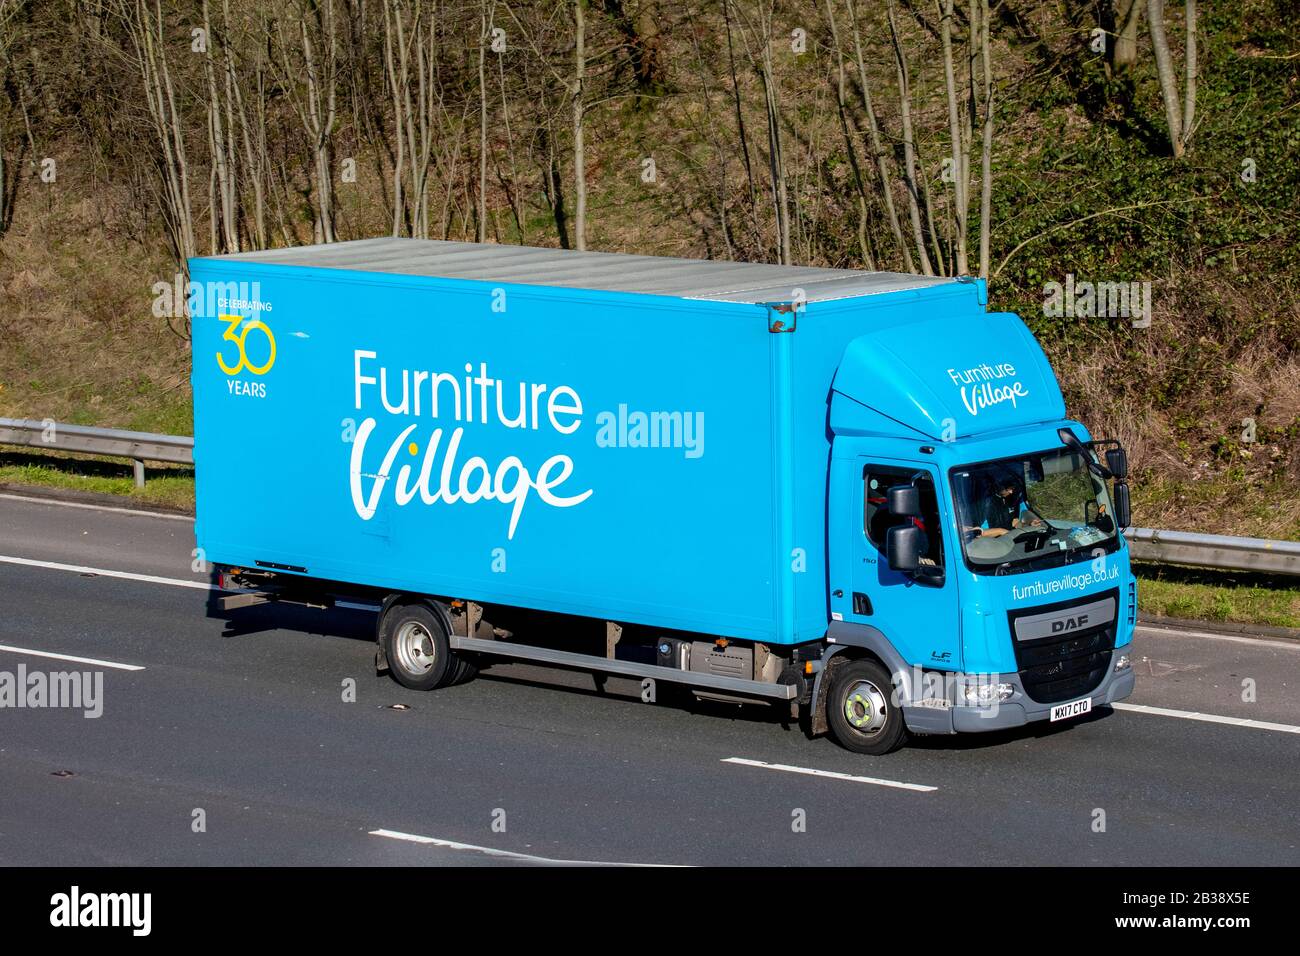 Furniture Village Hgv Haulage Delivery Trucks Lorry